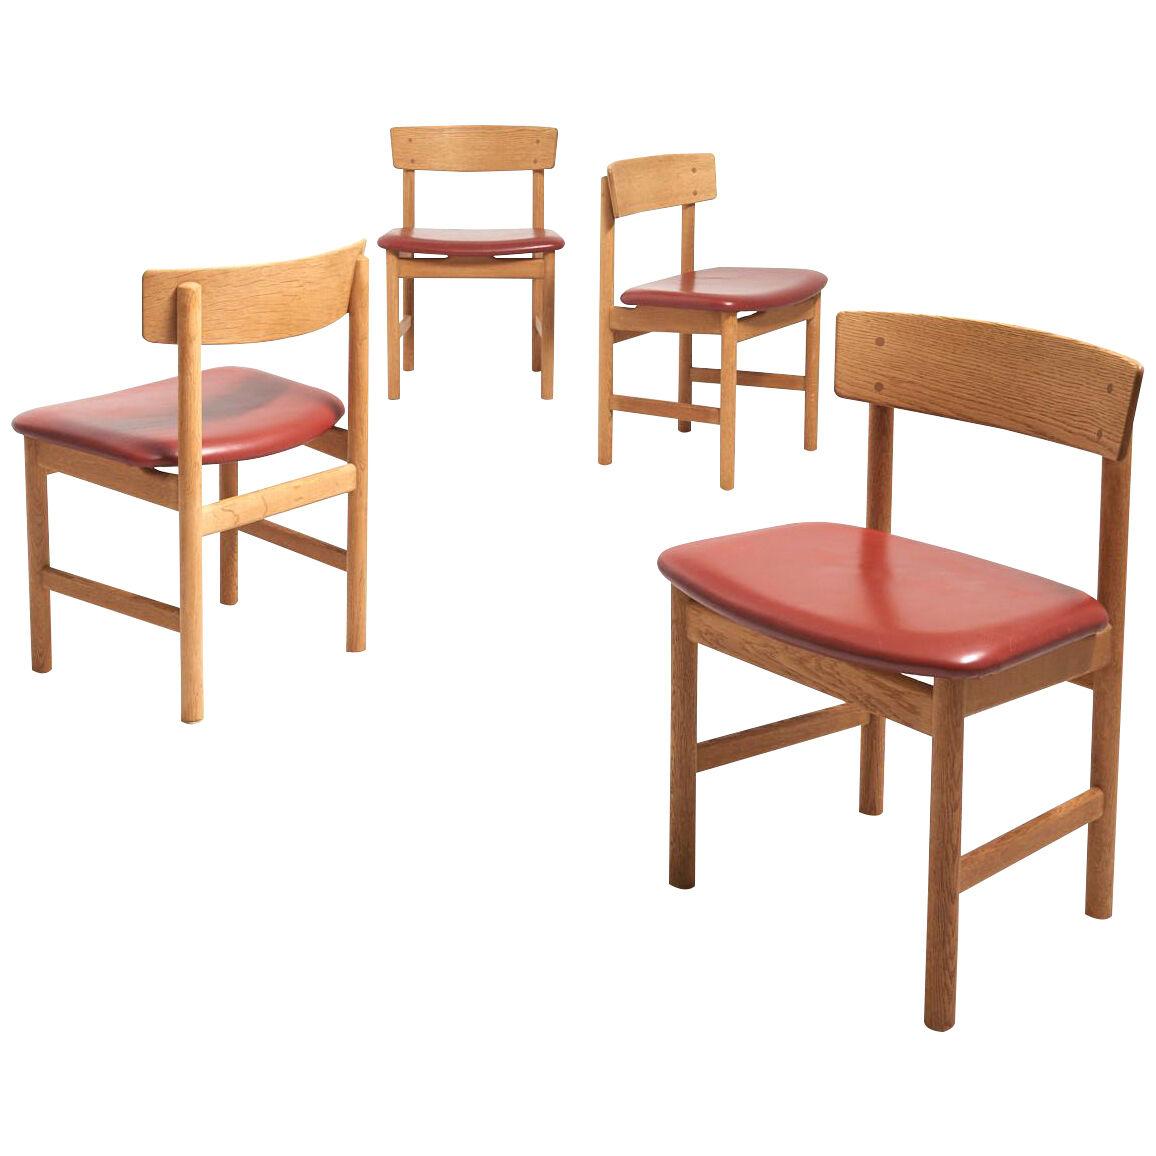 Set of 4 Dining Chairs by Børge Mogensen for Fredericia Stølefabrik, 1956